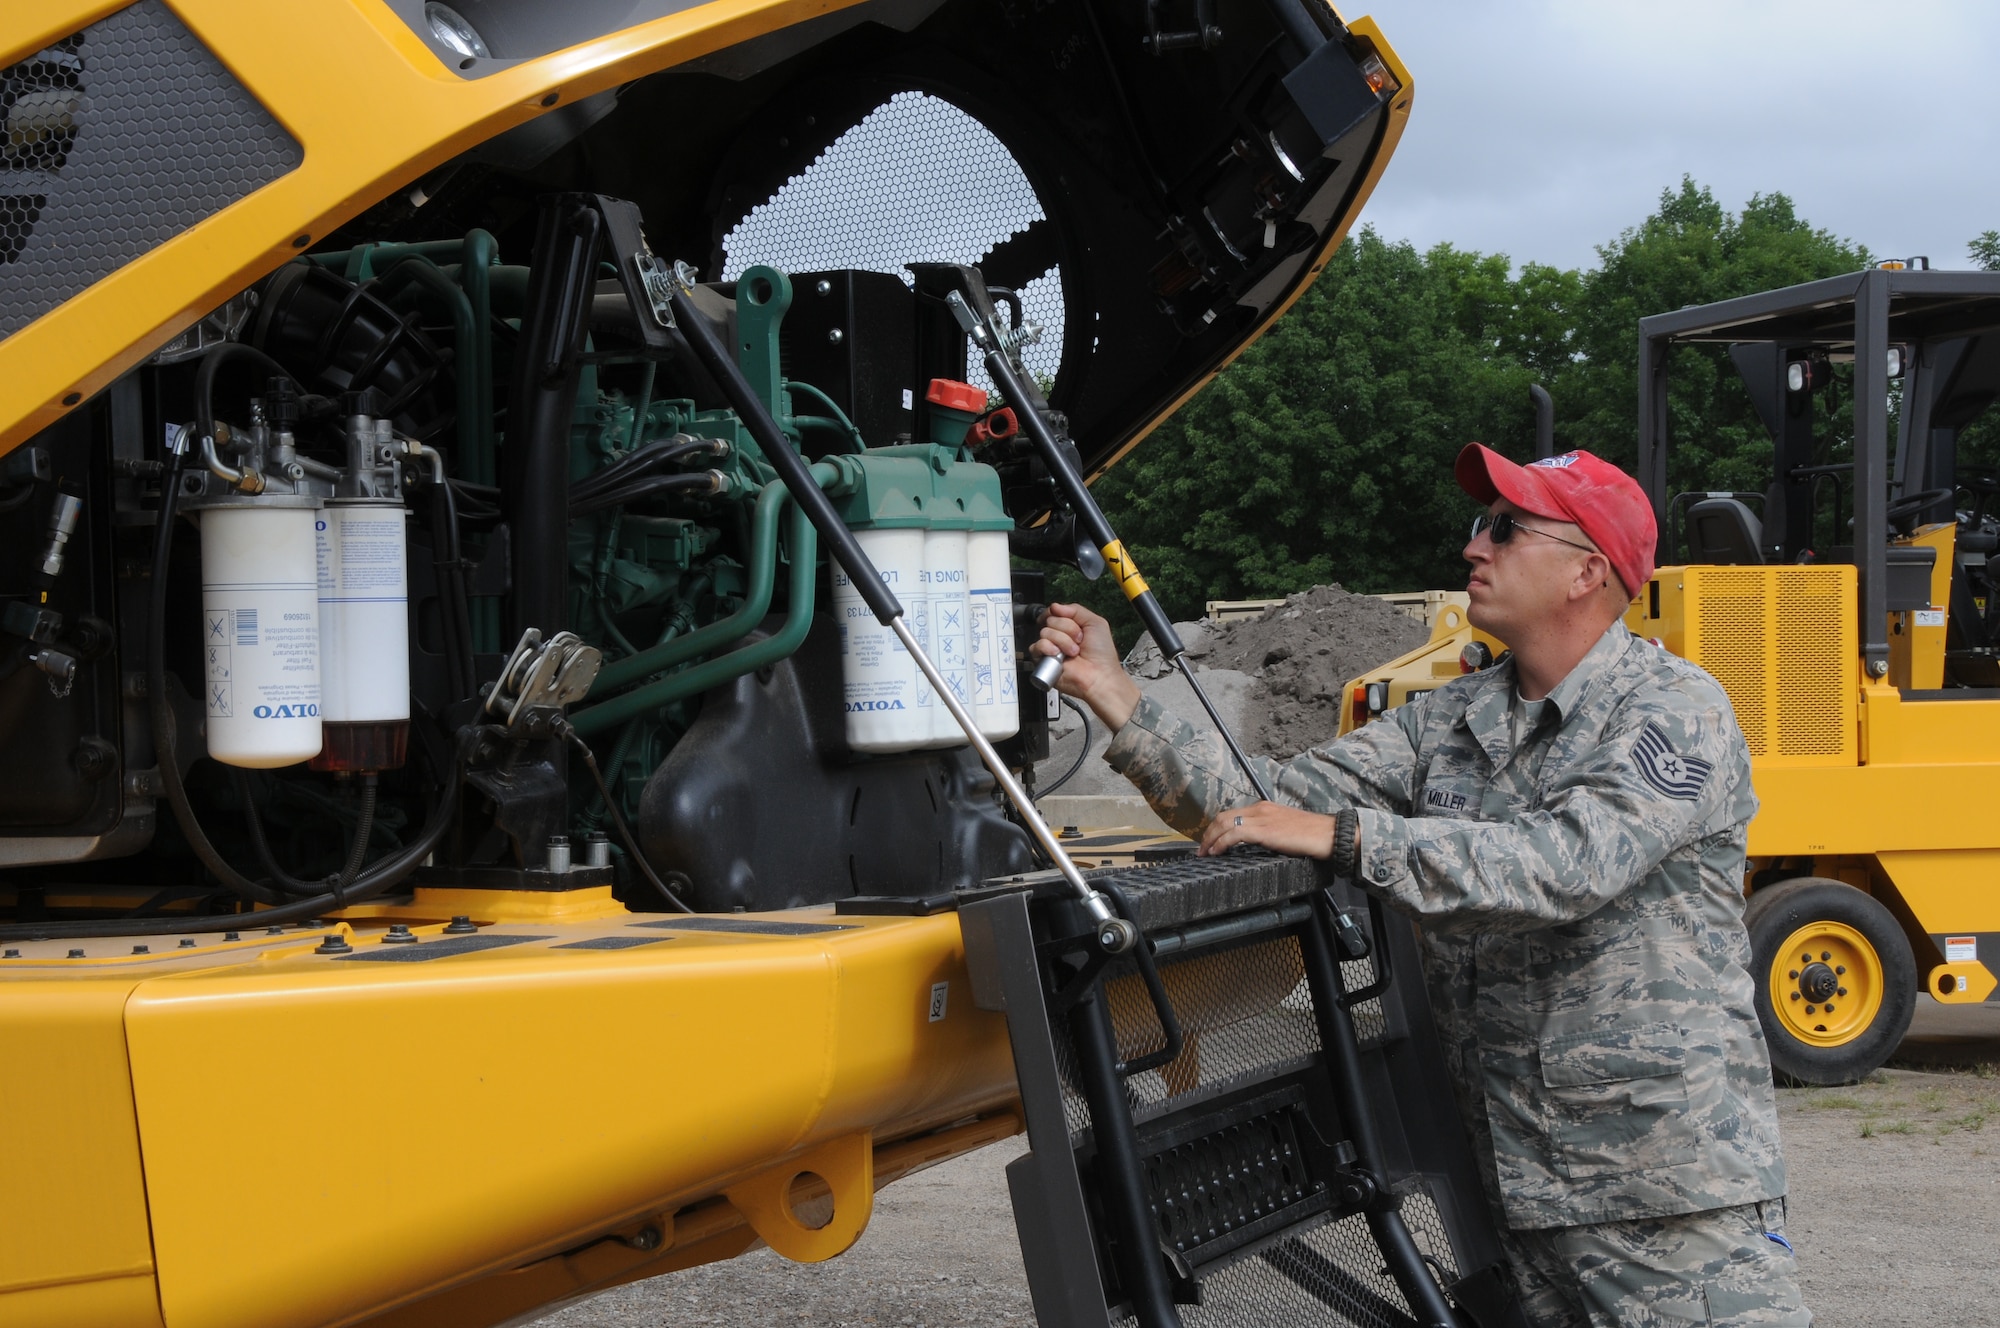 Tech Sgt. Samuel Miller Samuel Miller works on the Volvo 25-ton rock dump truck at Ebbing Air National Guard Base, Fort Smith, Arkansas. The vehicle’s capabilities were showcased during a tour of the 188th Civil Engineering Squadron Rapid Engineer Deployable Heavy Operational Repair Squadron Engineer (REDHORSE) Training Center. The 188th has the Air National Guard’s first and only REDHORSE training center. (U.S. Air National Guard photo by Airman 1st Class Cody Martin/released)